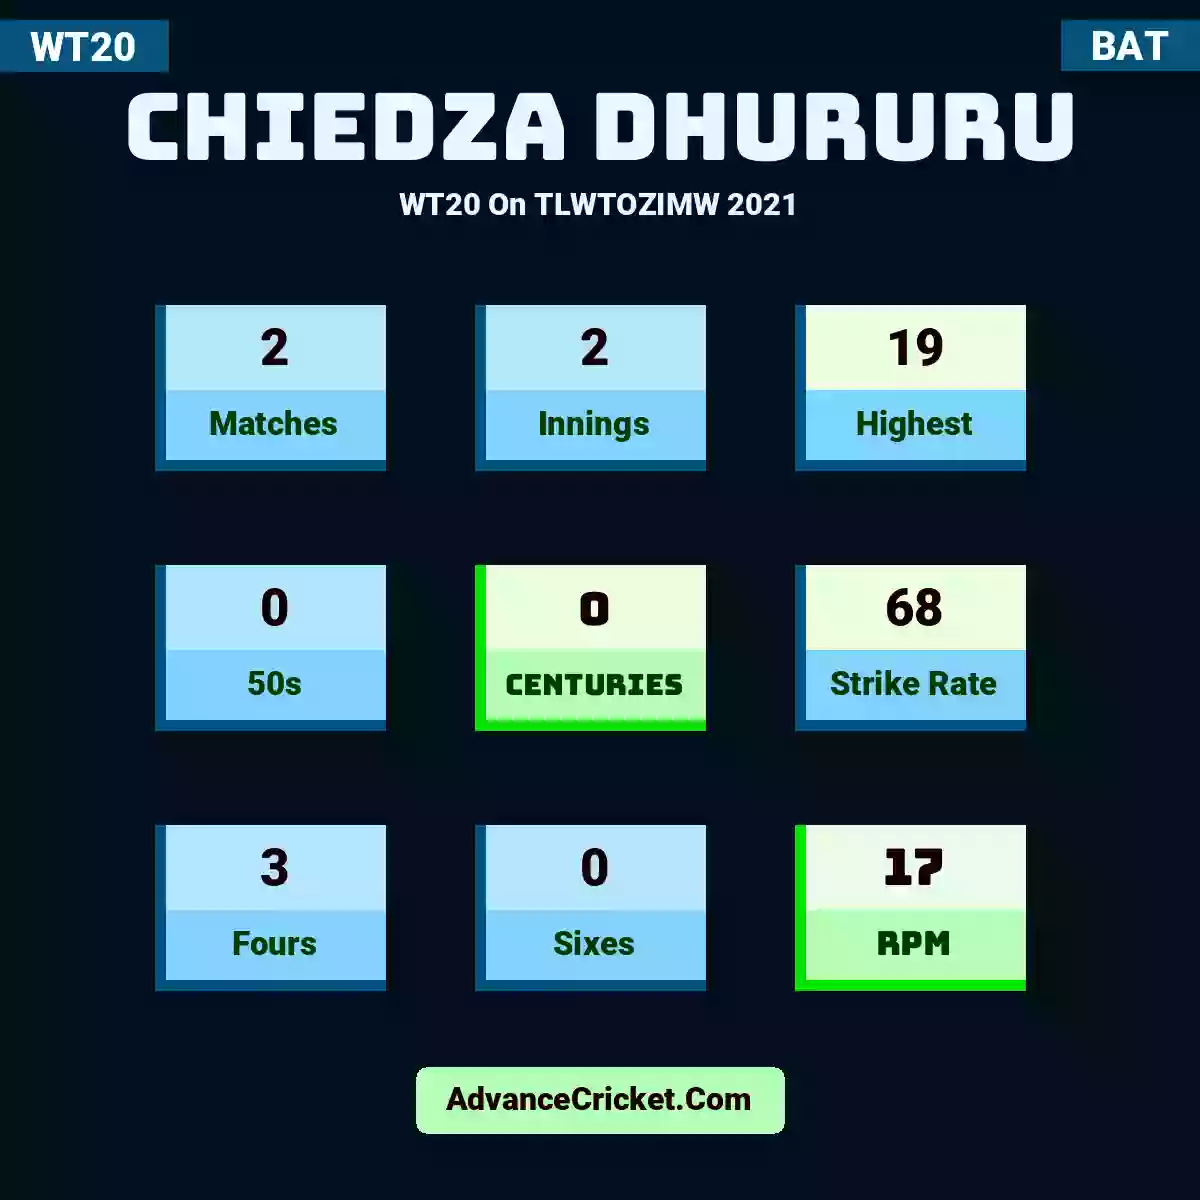 Chiedza Dhururu WT20  On TLWTOZIMW 2021, Chiedza Dhururu played 2 matches, scored 19 runs as highest, 0 half-centuries, and 0 centuries, with a strike rate of 68. C.Dhururu hit 3 fours and 0 sixes, with an RPM of 17.